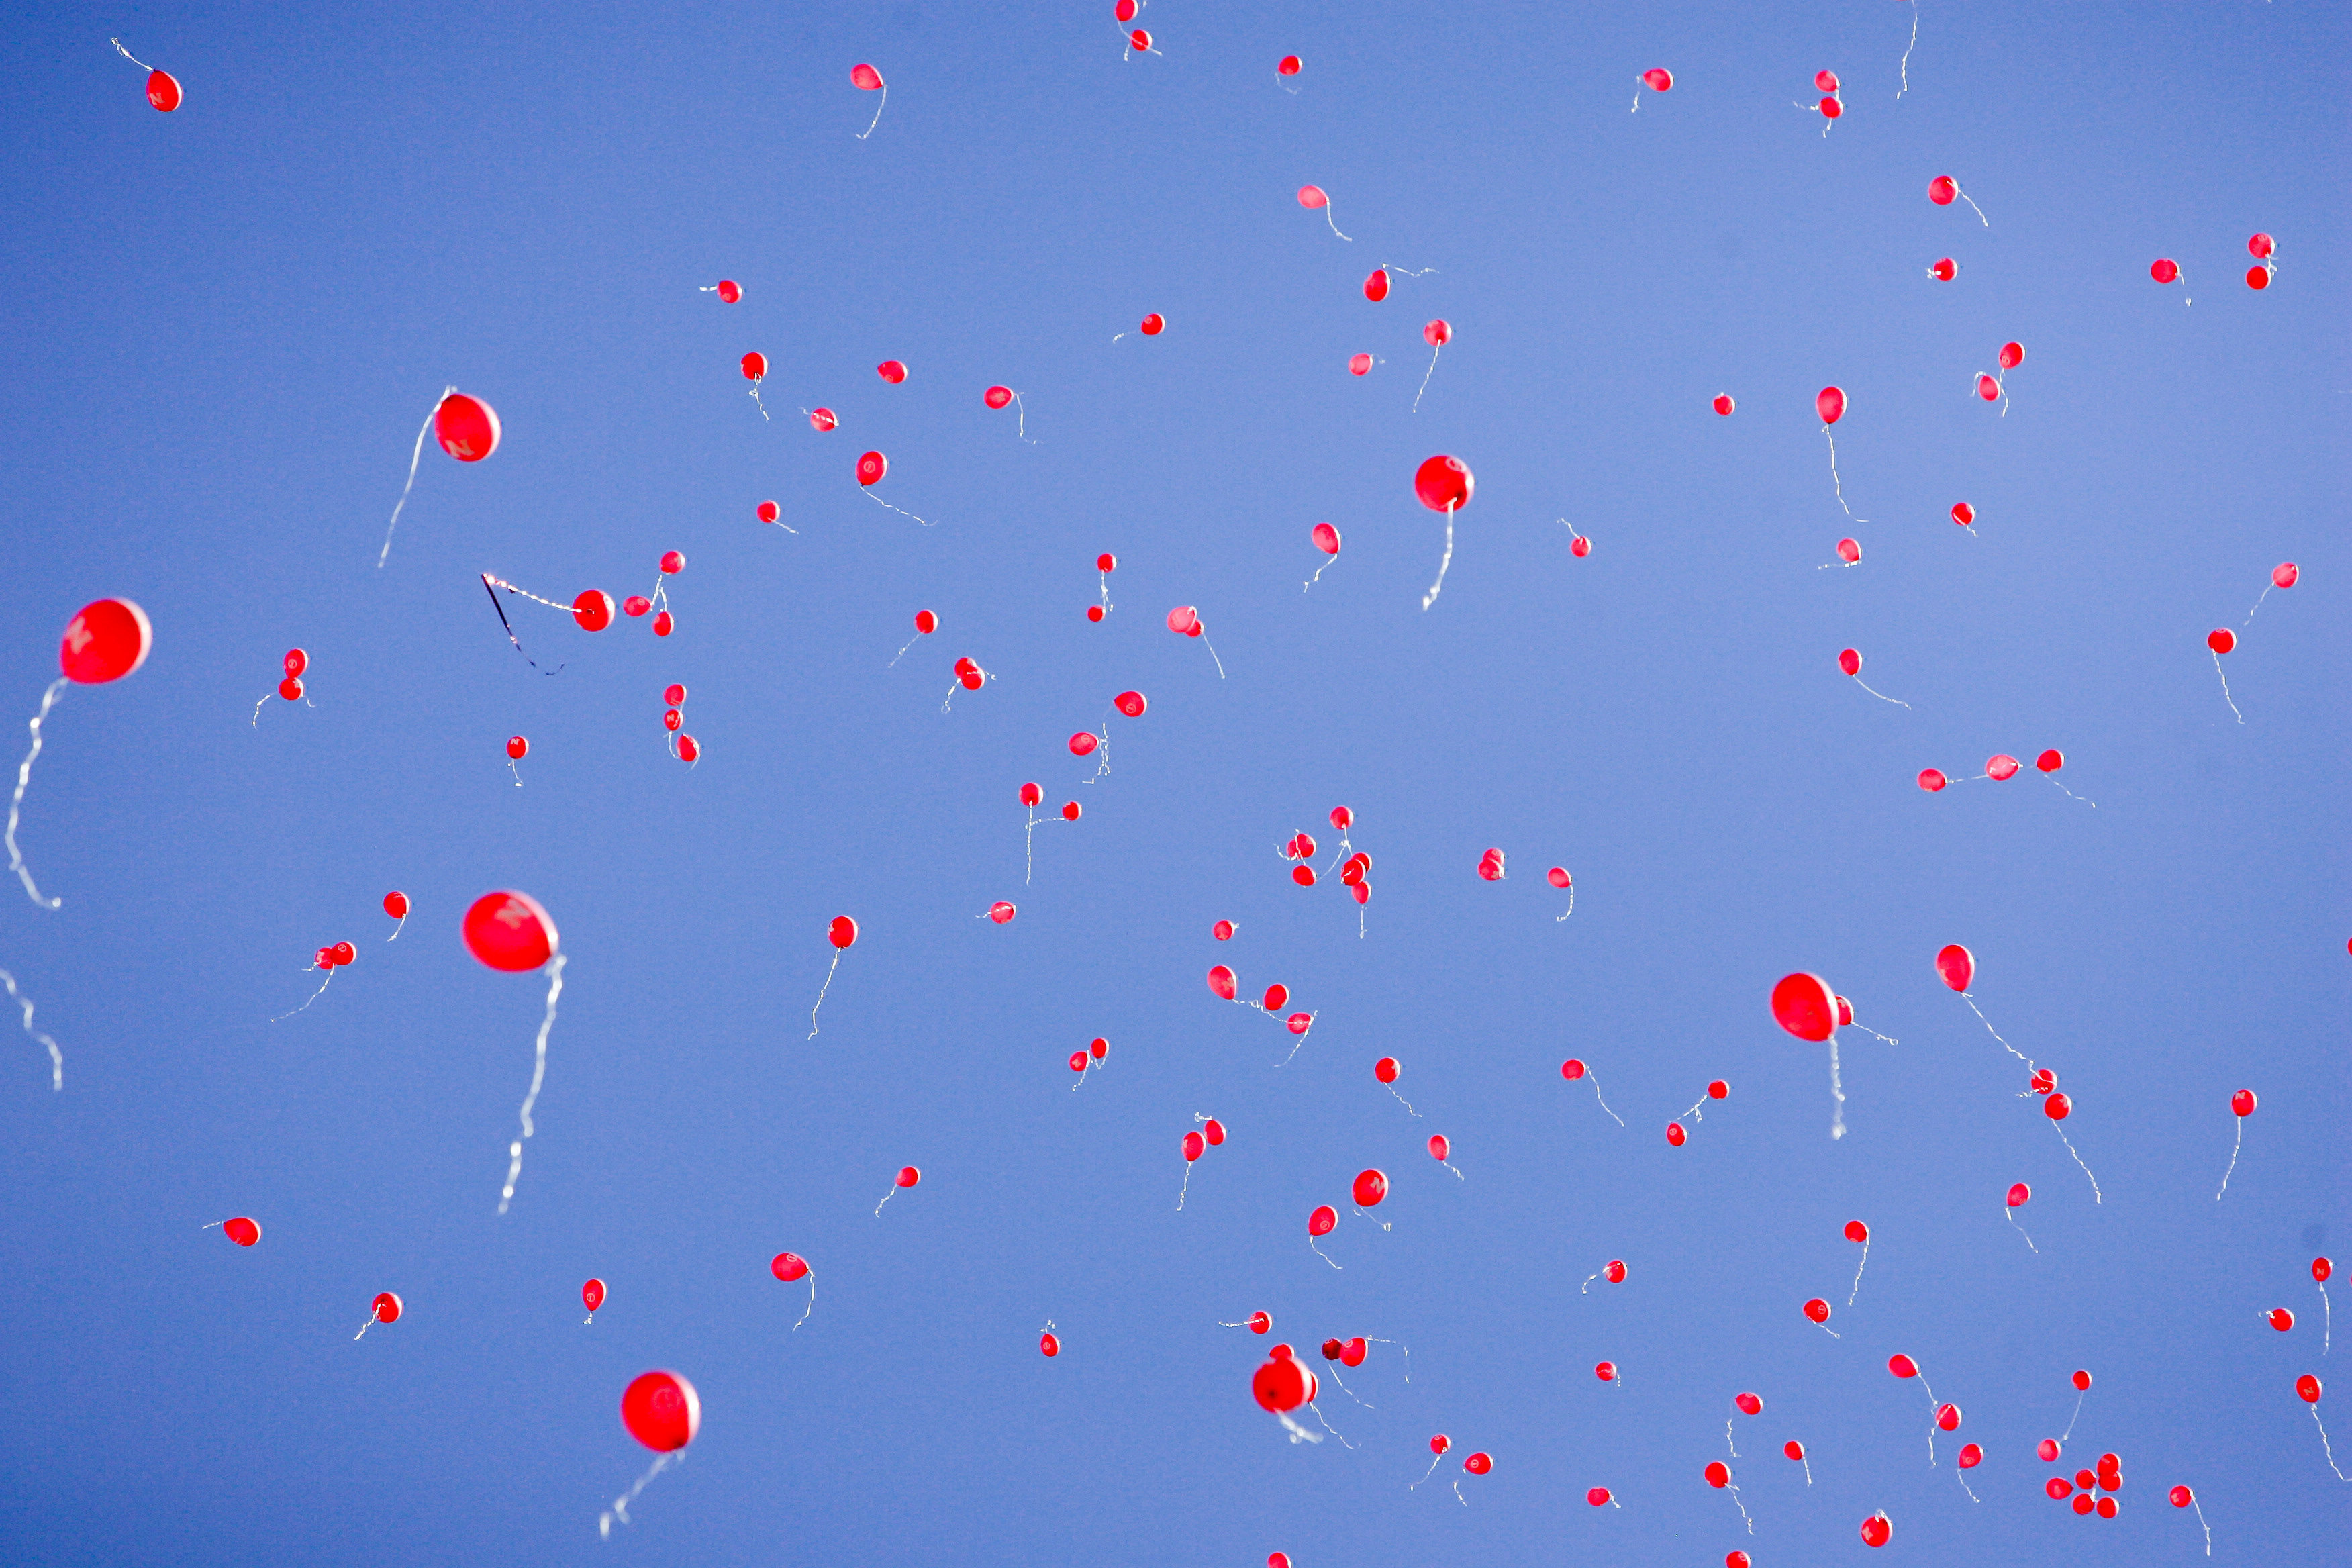 Plastic Bags and Straws Are Banned in Some Places. Here's Why Balloons Could Be Next